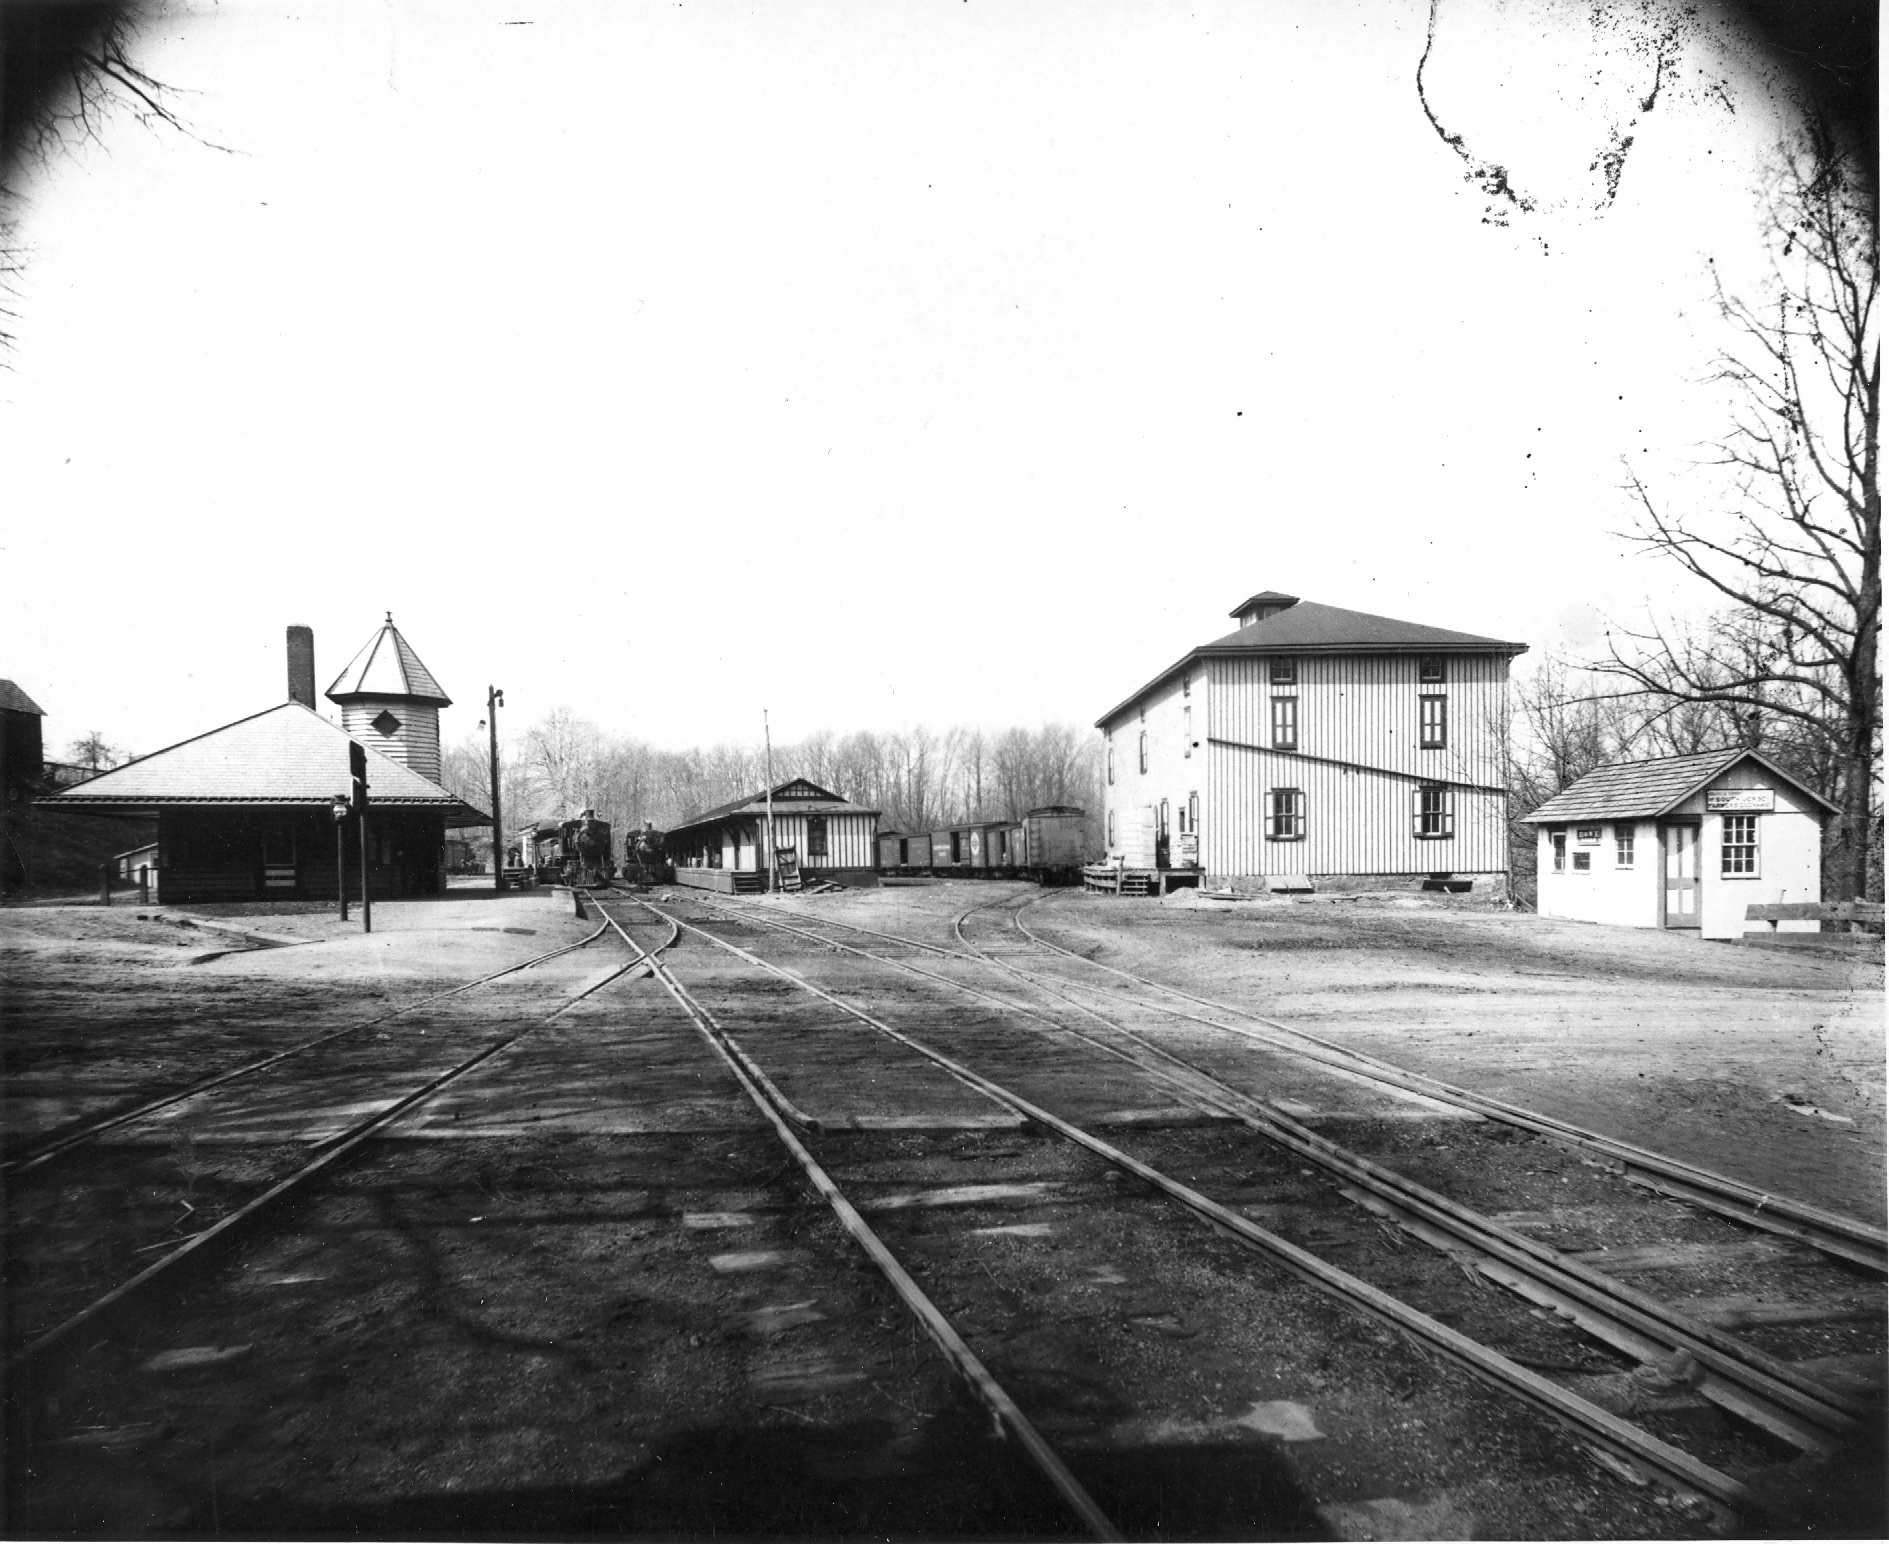   Mullica Hill Station and Warehouse, South Main Street, c1900. Reading Railroad completed the Mullica Hill branch of the Williamstown line in 1889. It provided passenger service but became a major shipping point for the region’s farm produce. [HTHS: